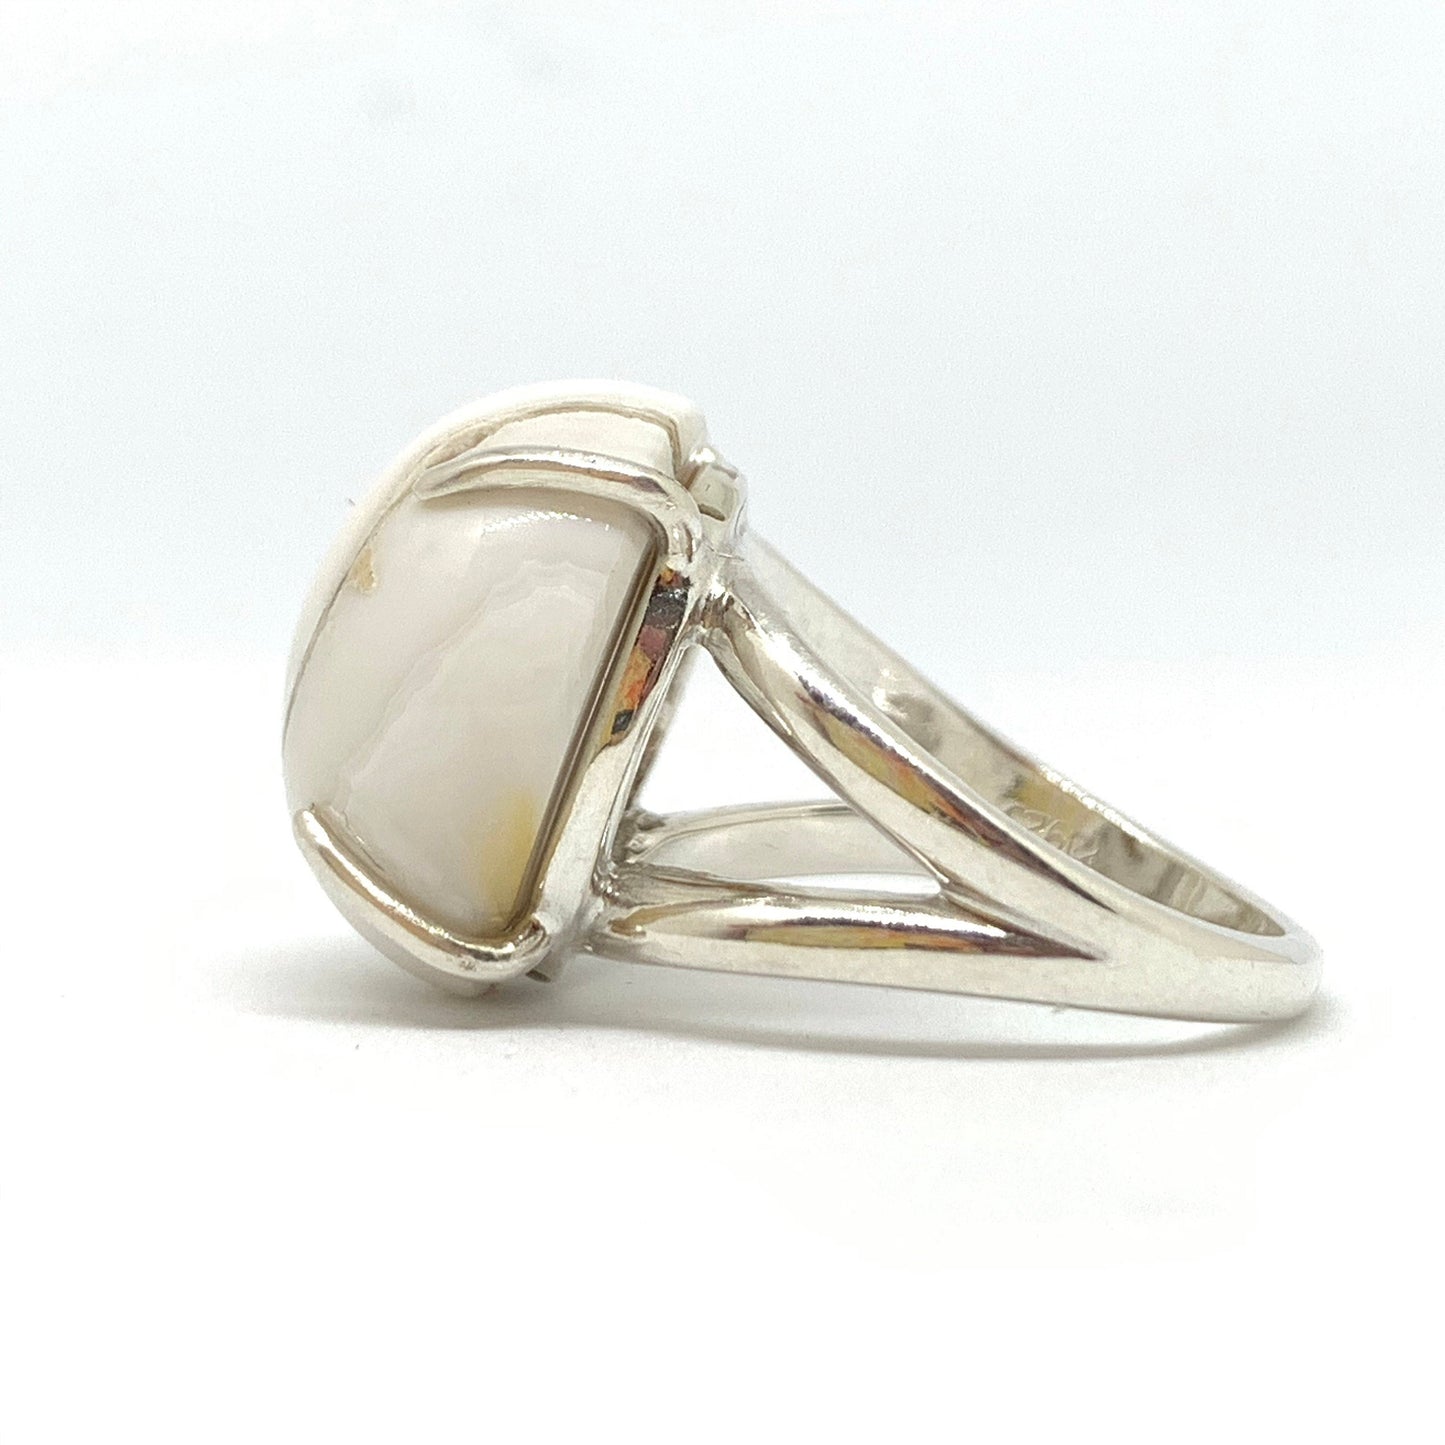 Agatized Sea Snail Fossil Ring